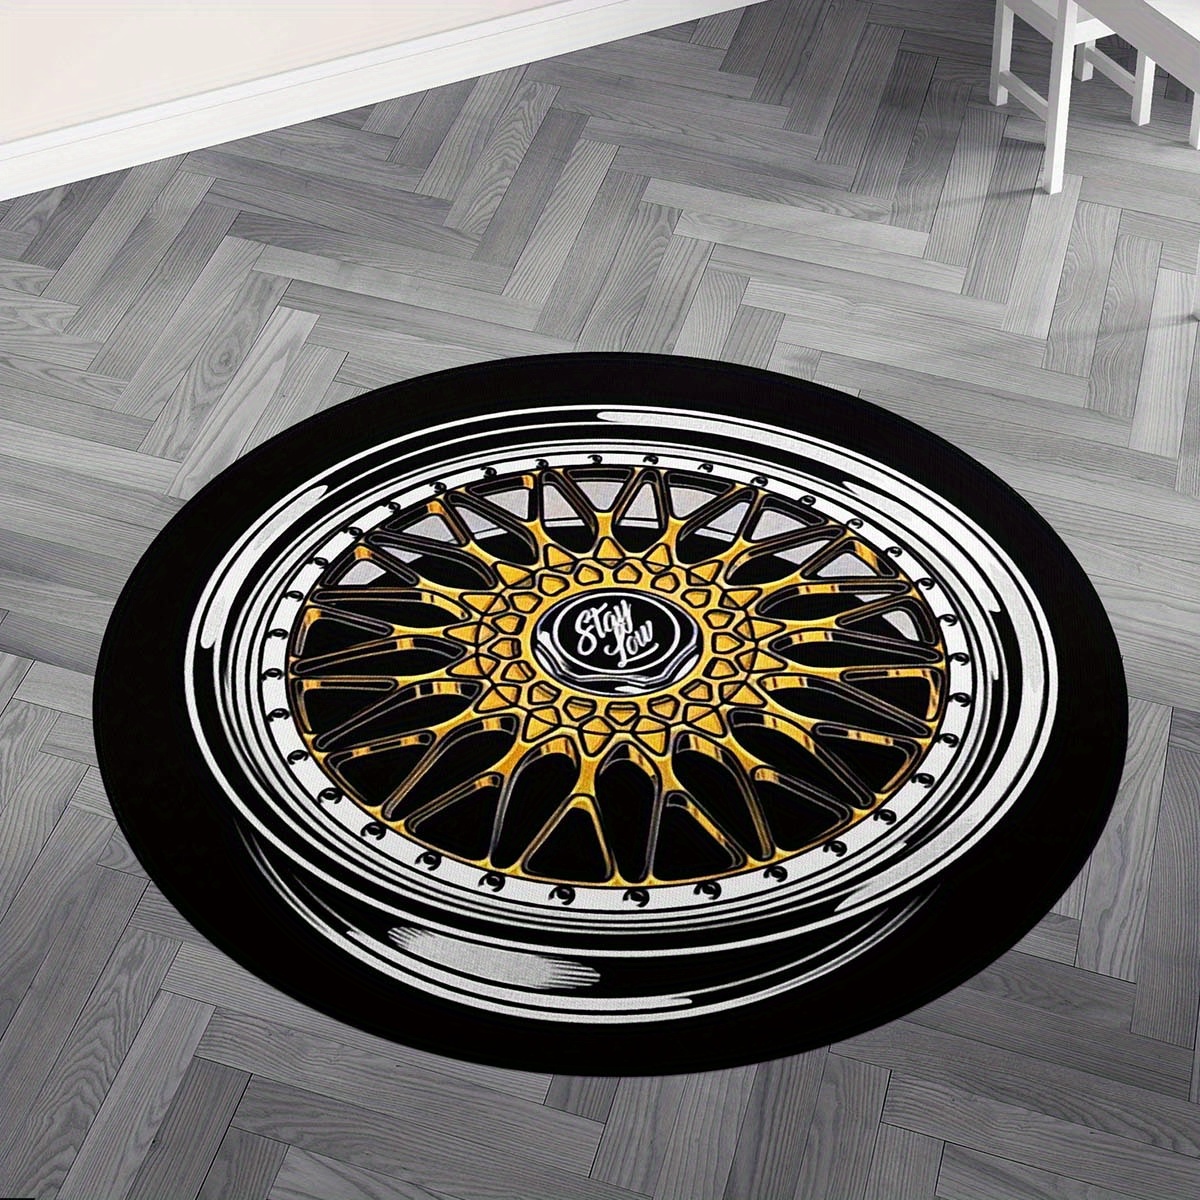 

Luxury Metallic Tire-shaped Round Rug - Plush, 1000g/sqm, 6mm Thick, Non-slip Backing, Ideal For Living Room & Entryway Decor